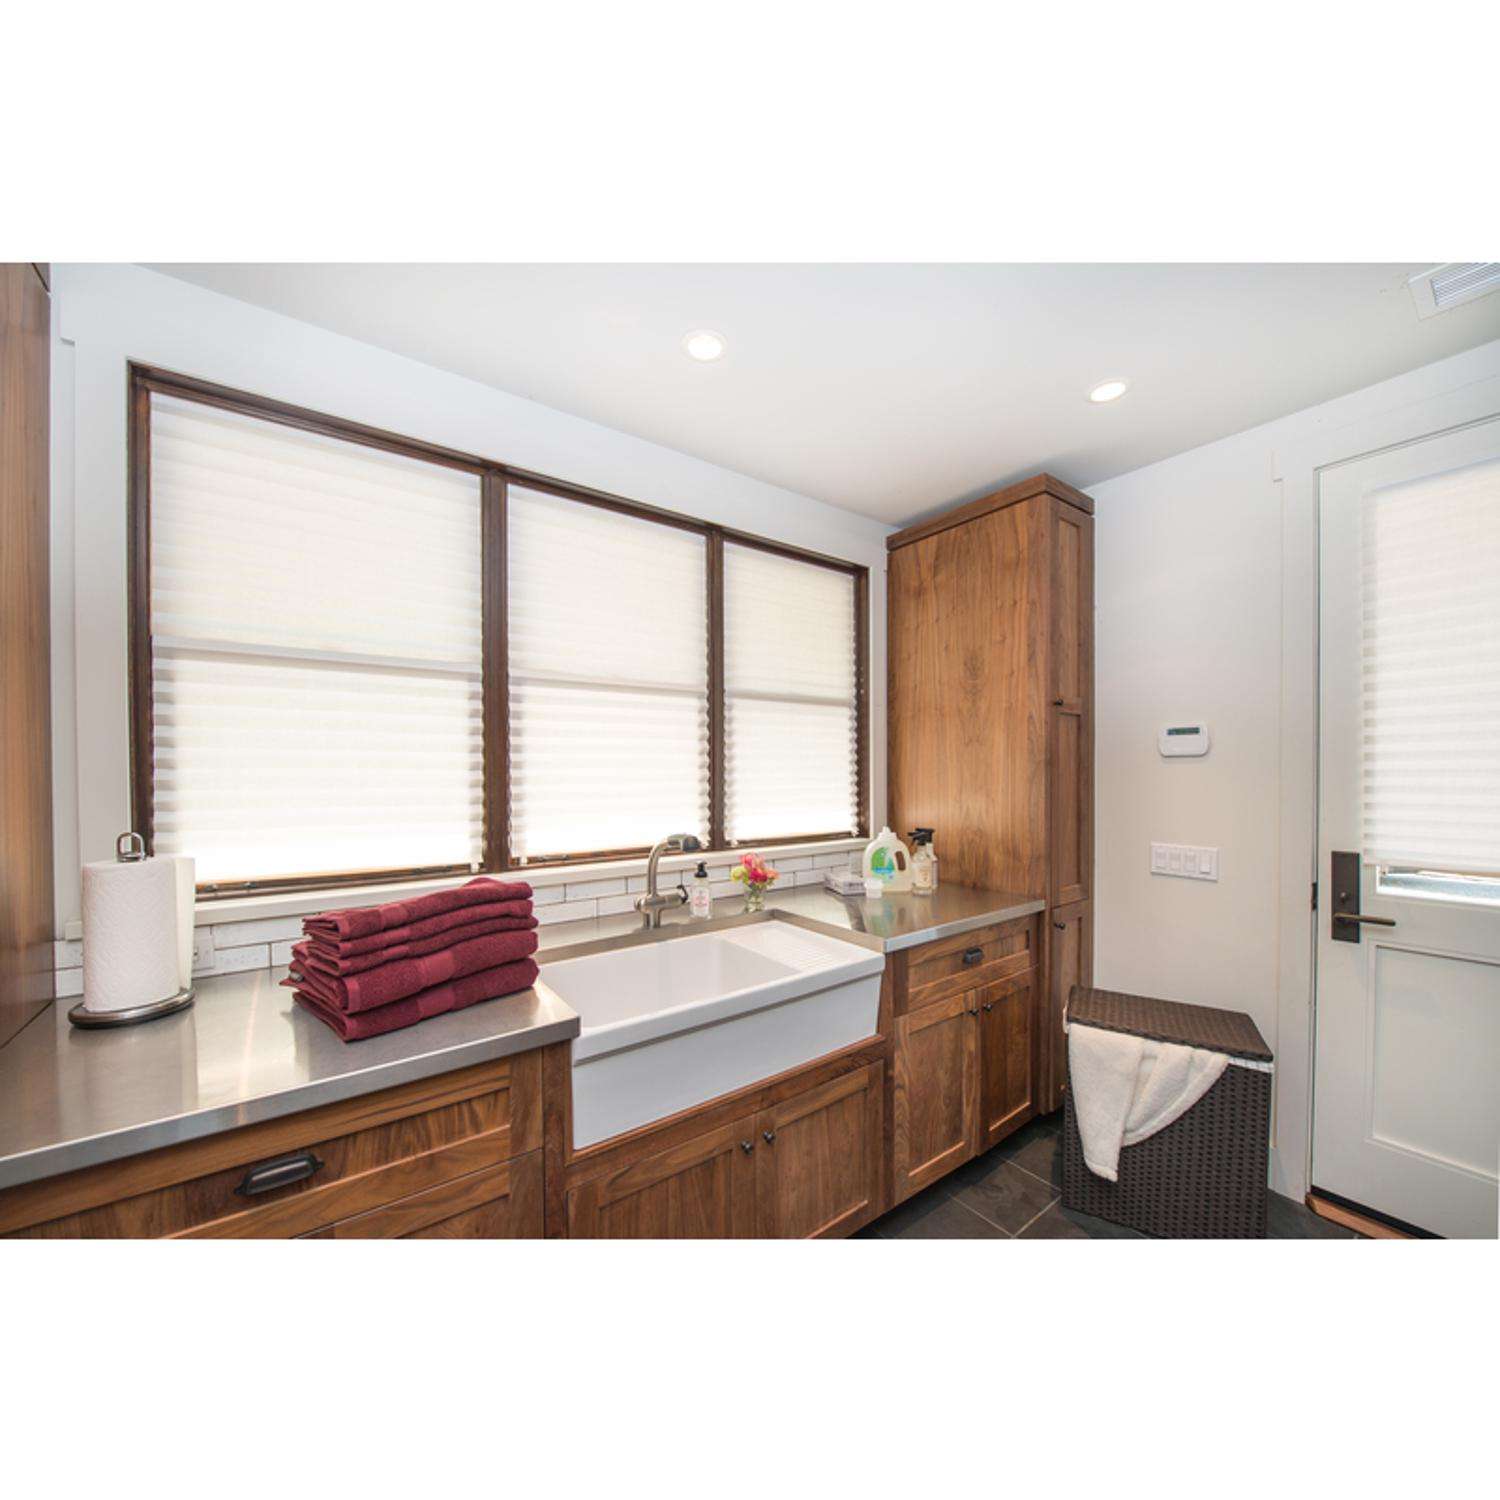 A Simple Mod to our RV Door Window Shade Gives Both a View & Privacy! 